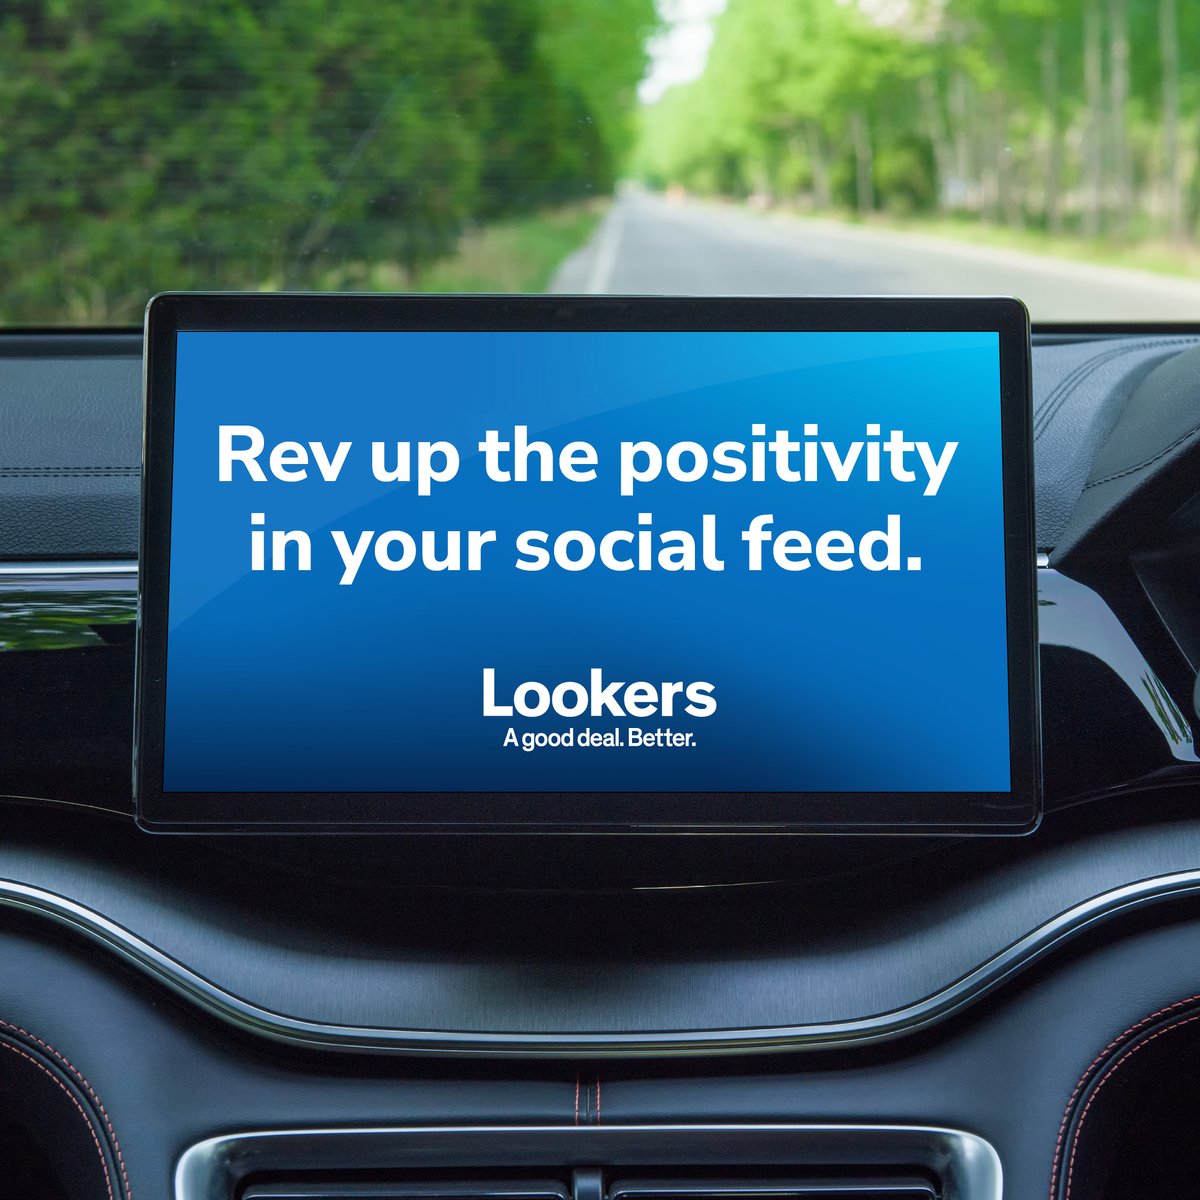 Spread kindness on social media! Today is #SocialMediaKindnessDay, a day dedicated to promoting positivity, empathy, and kindness in the digital world. Let's make social media a kinder place for everyone 💙 #ChooseLookers